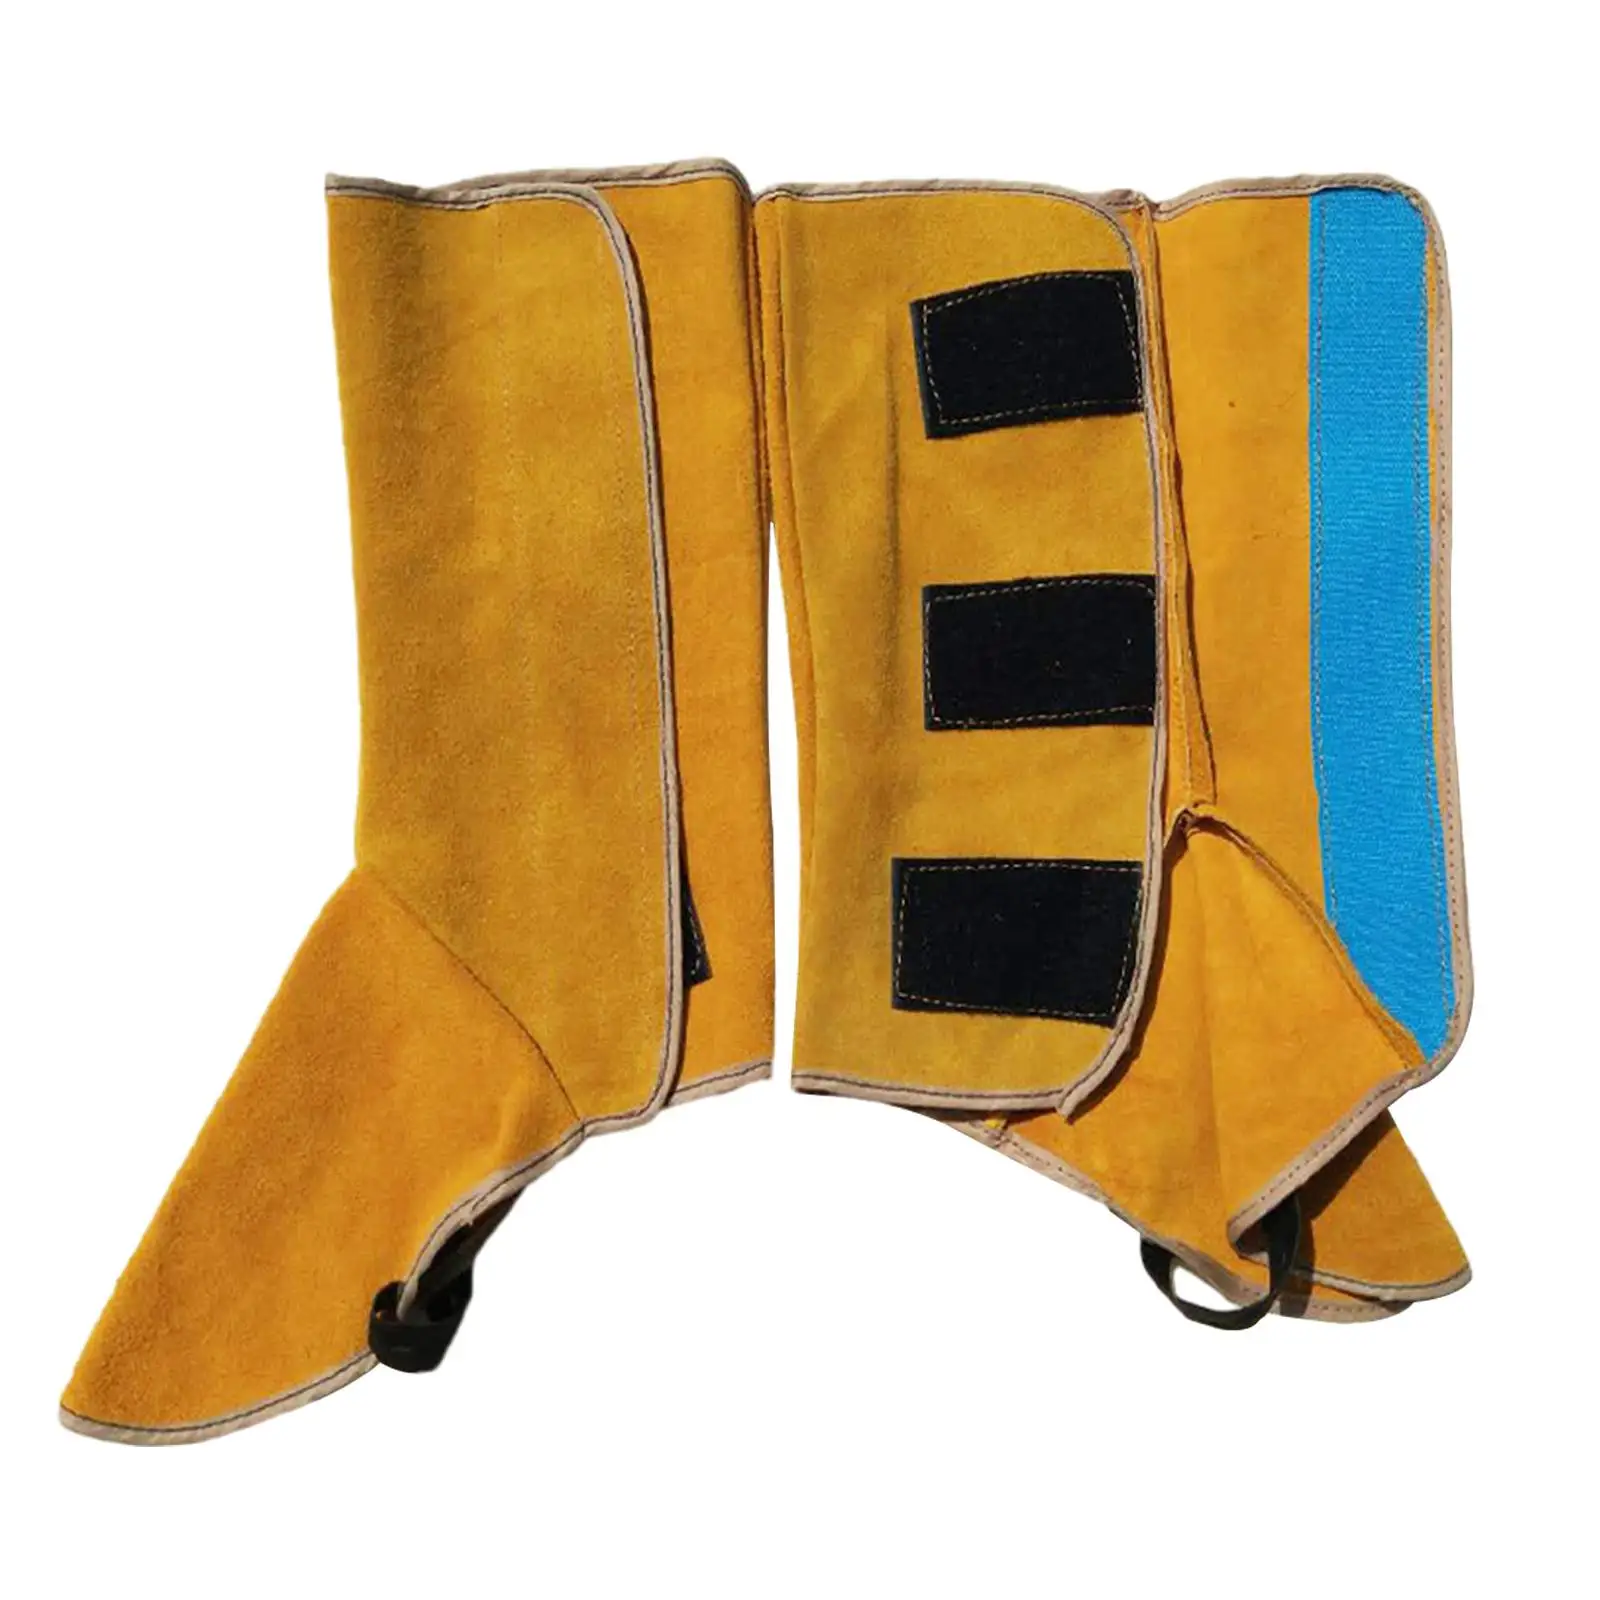 2 Pieces Welding Boot Cover Welding Gaiters Tools Safe Leather Welding Spats for Household Farming Processing Glass Processing